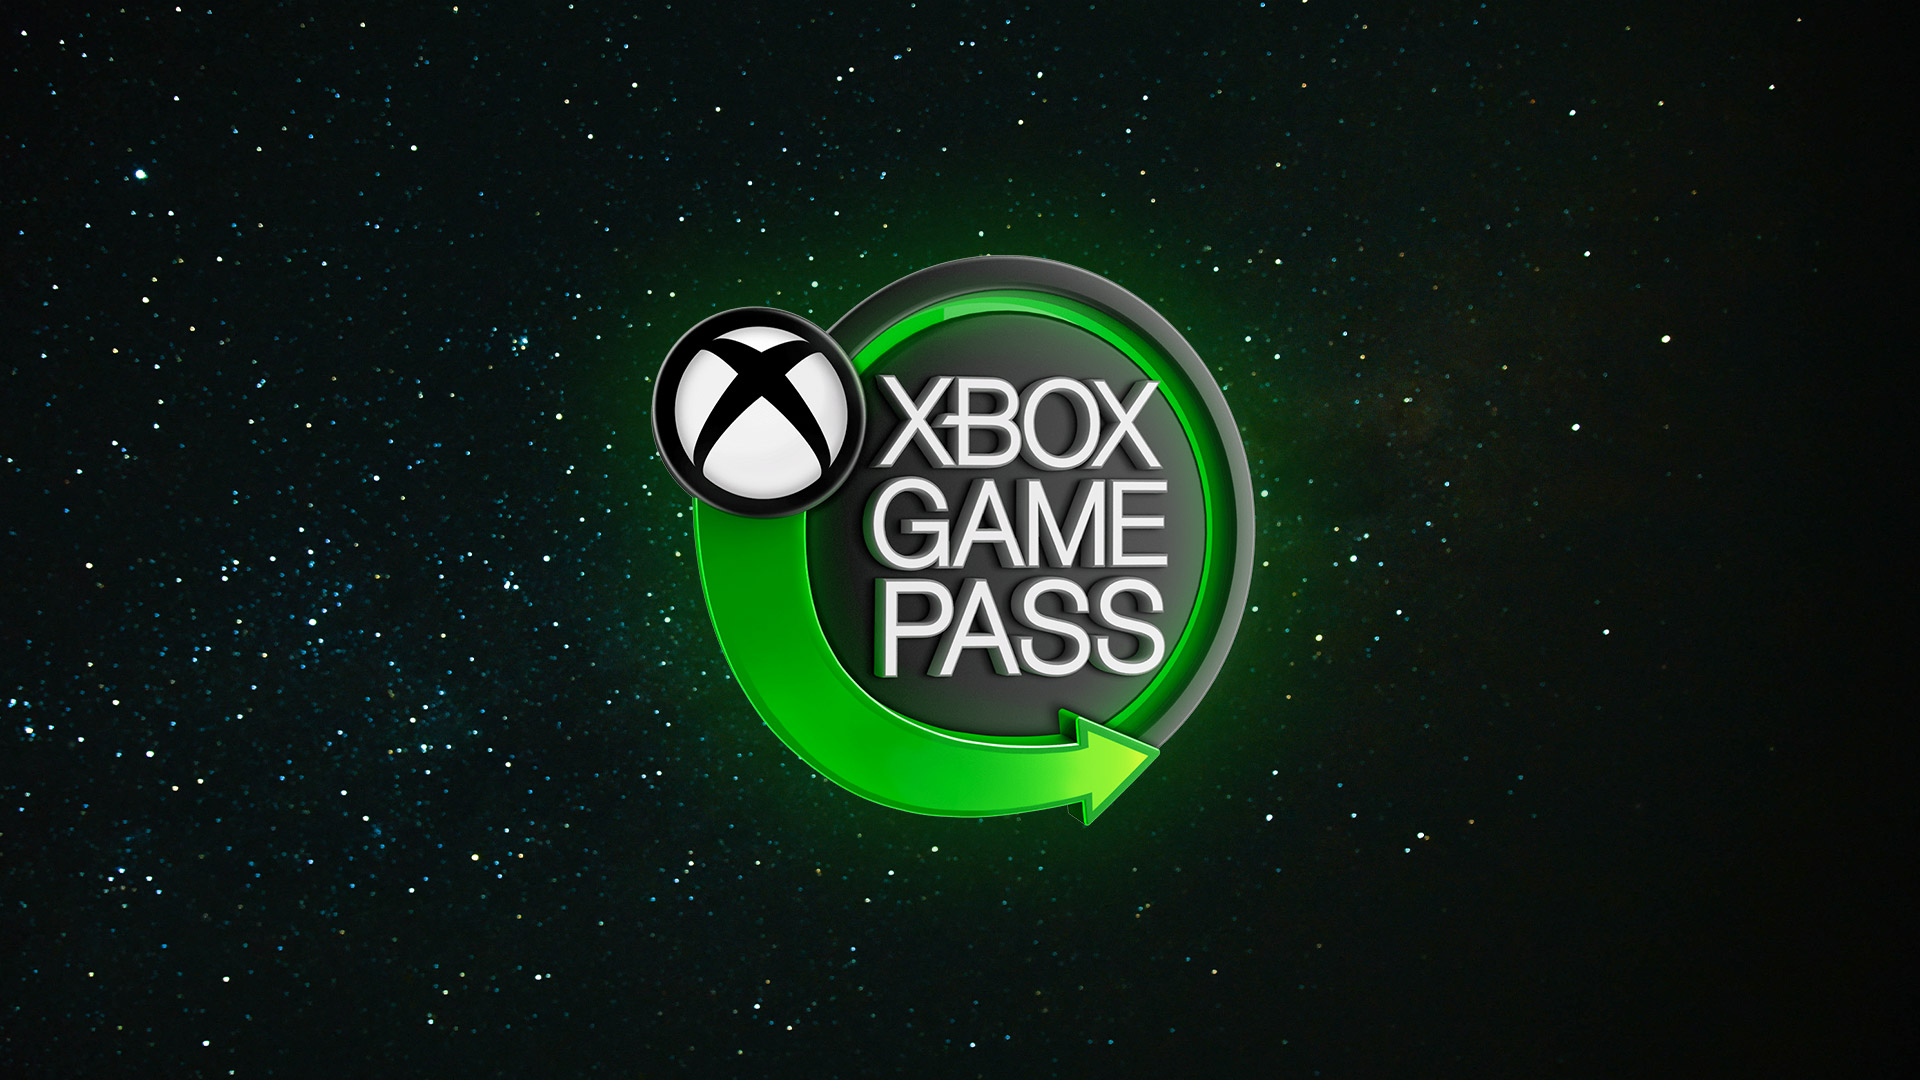 does game pass work if you game share on xbox